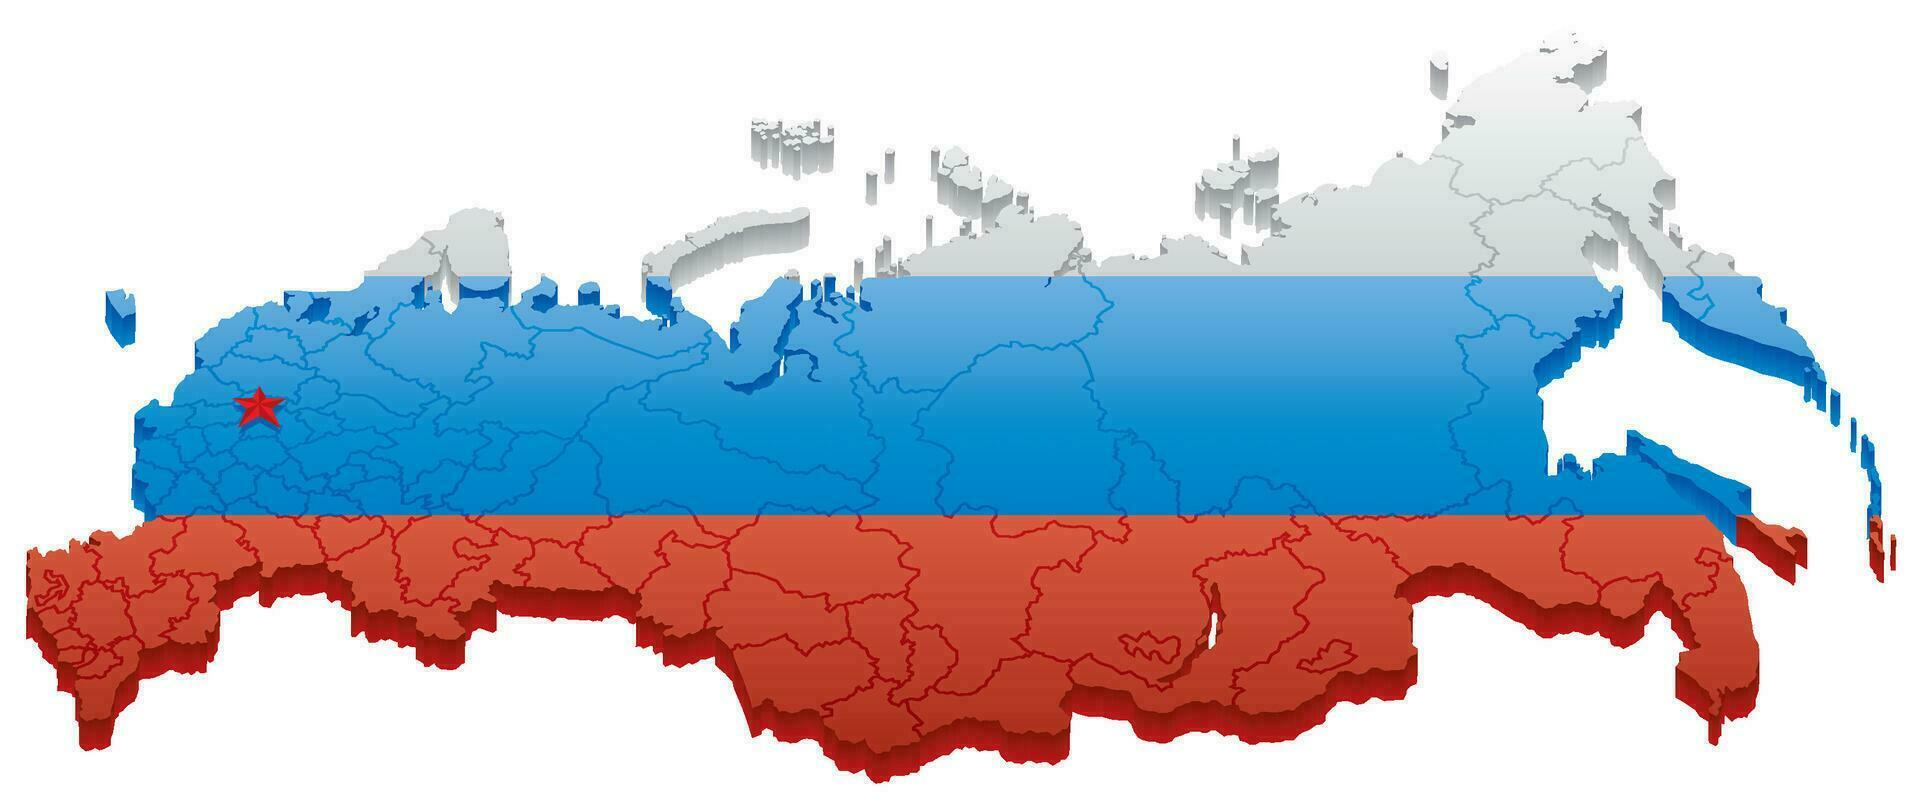 Russian Federation Map vector